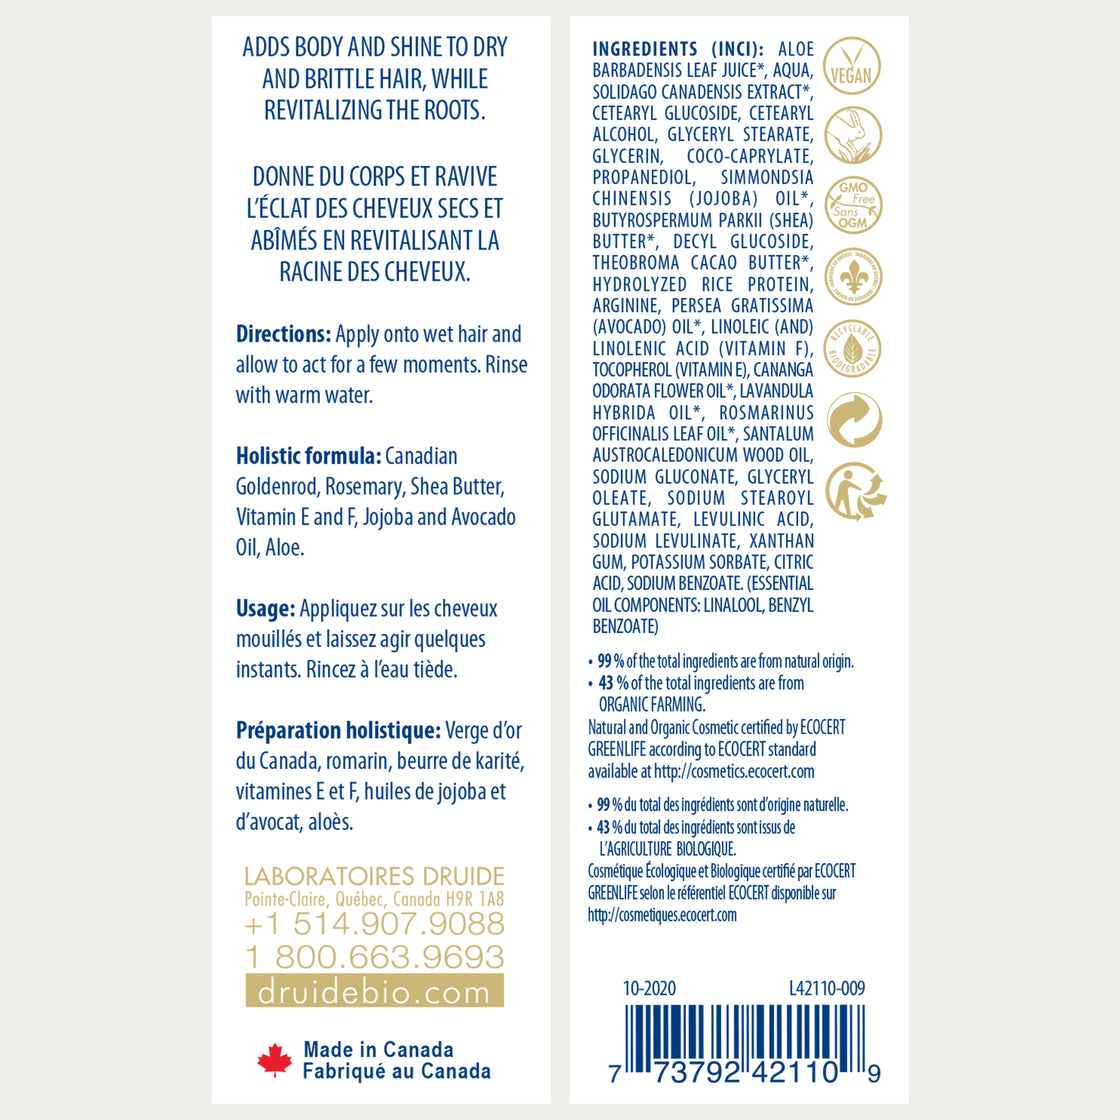 Druide Natural Hair conditioner packaging label with product benefits, ingredients, certifications, and origin.